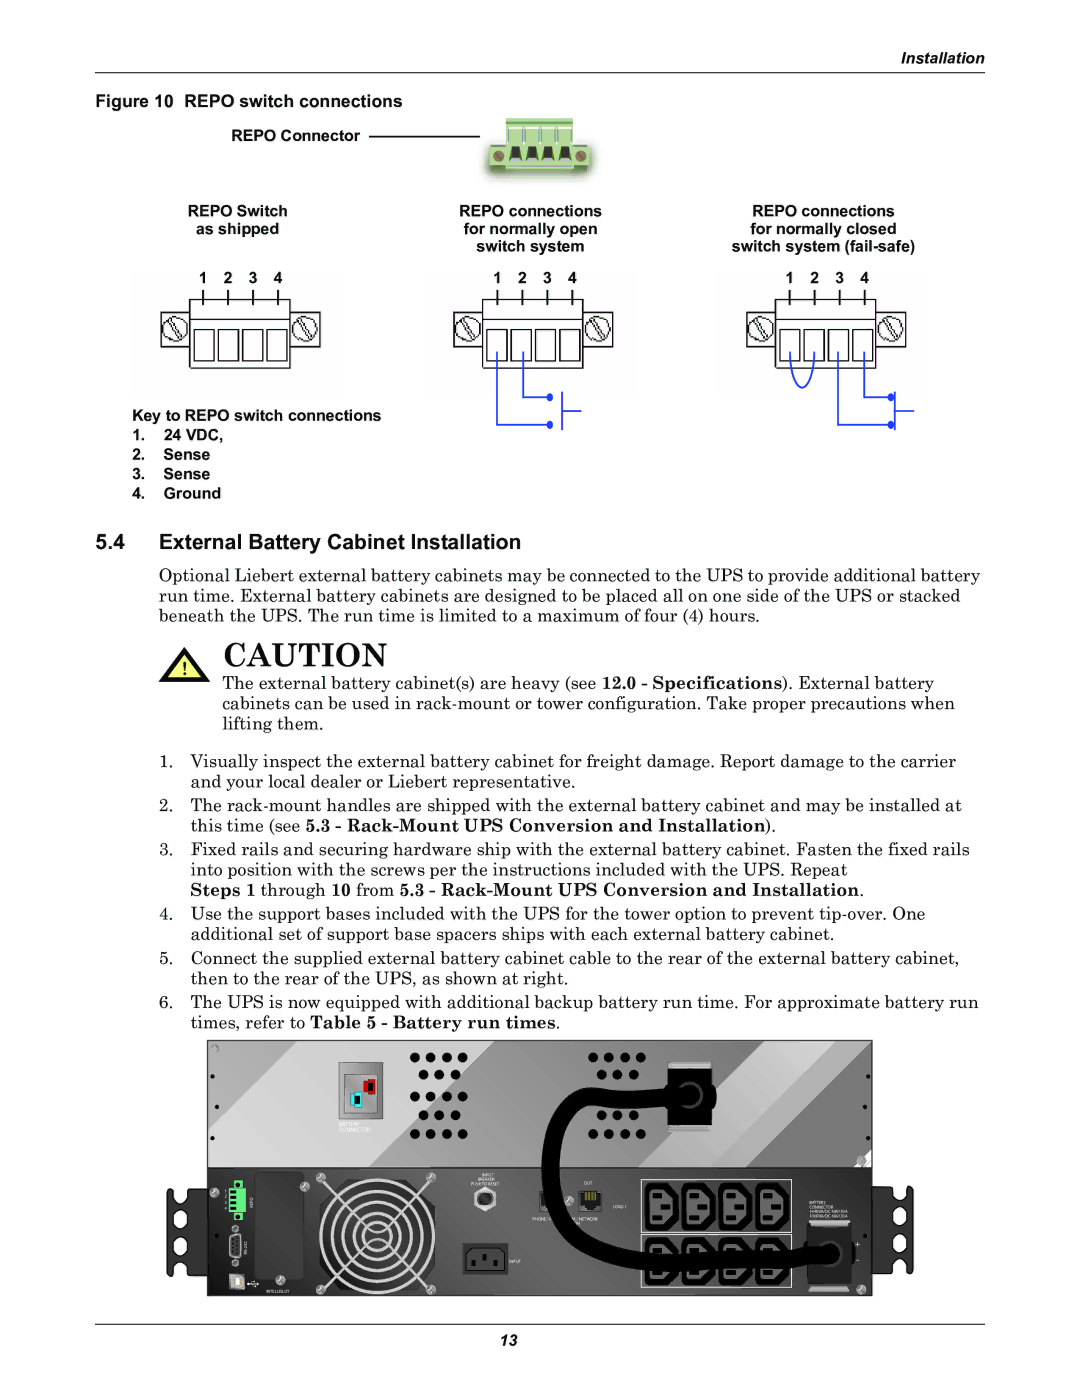 Liebert PSITM user manual External Battery Cabinet Installation, Key to Repo switch connections 24 VDC Sense Ground 